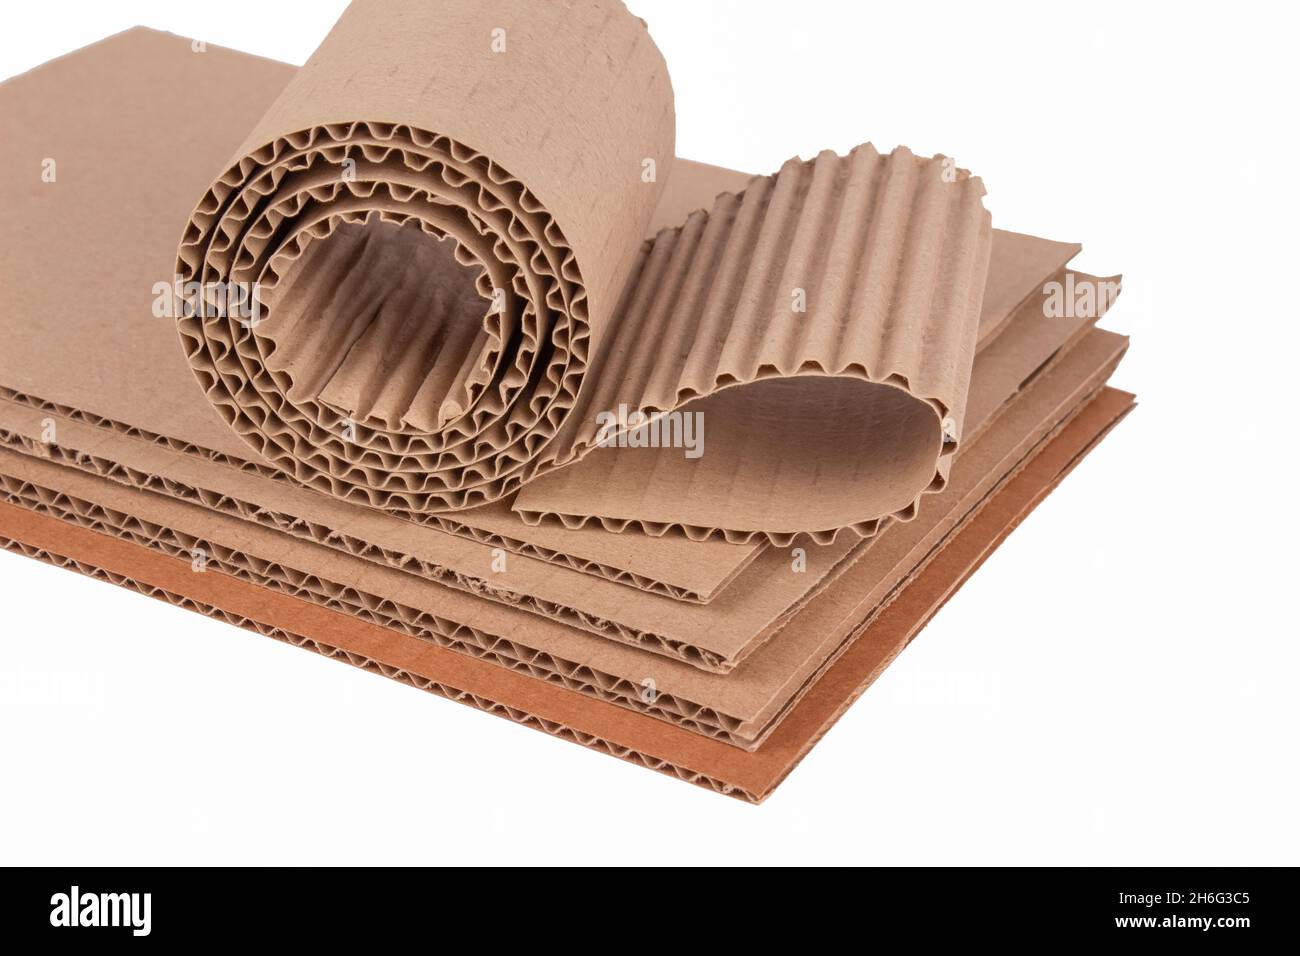 Corrugated Rolls : Corrugated Cardboard Roll (various sizes)